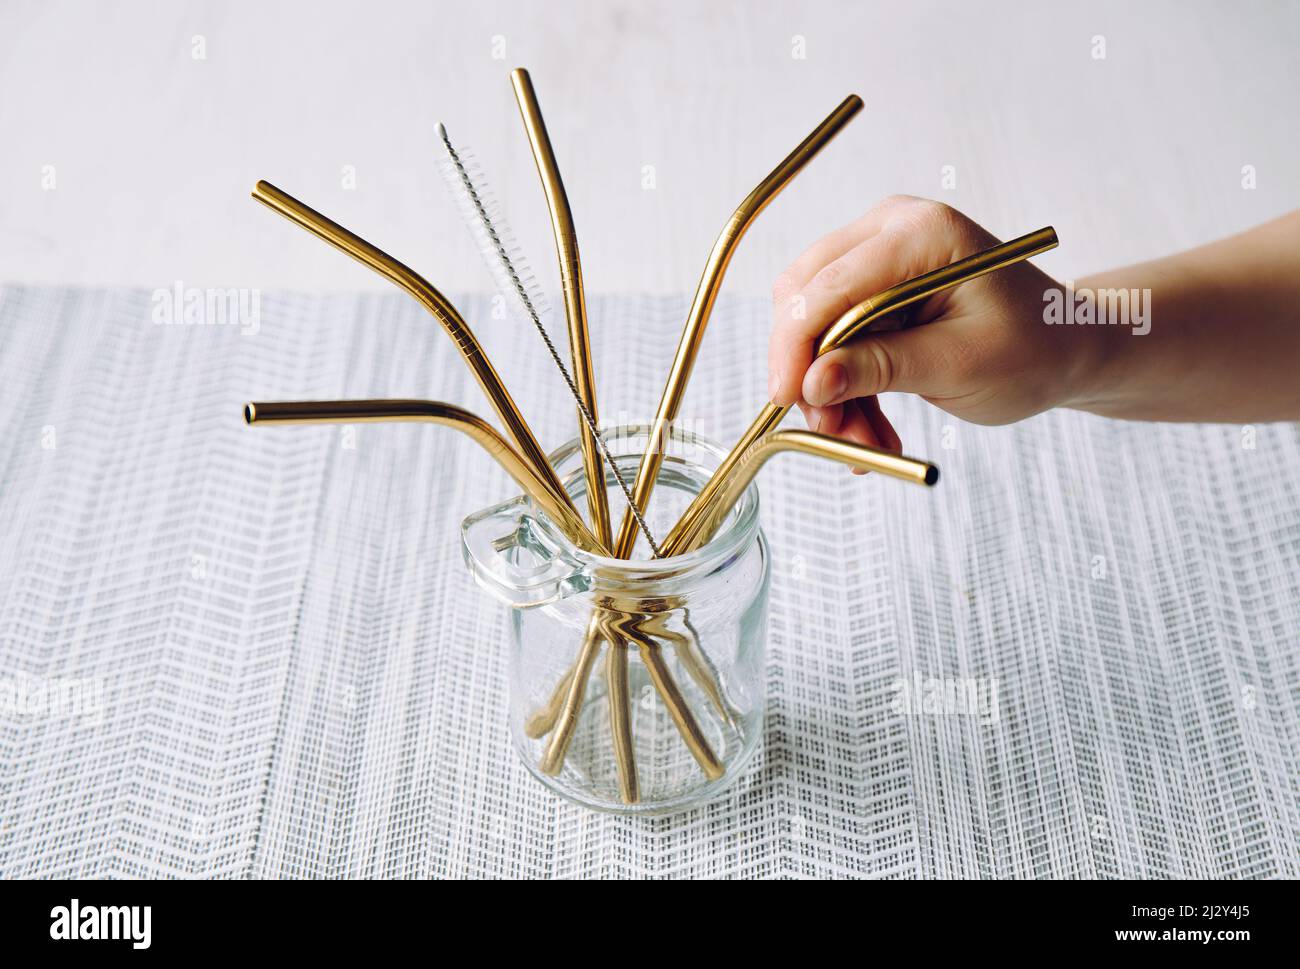 Child hand take golden metal drinking straw from glass jar in home kitchen. Sustainable lifestyle concept. Stock Photo